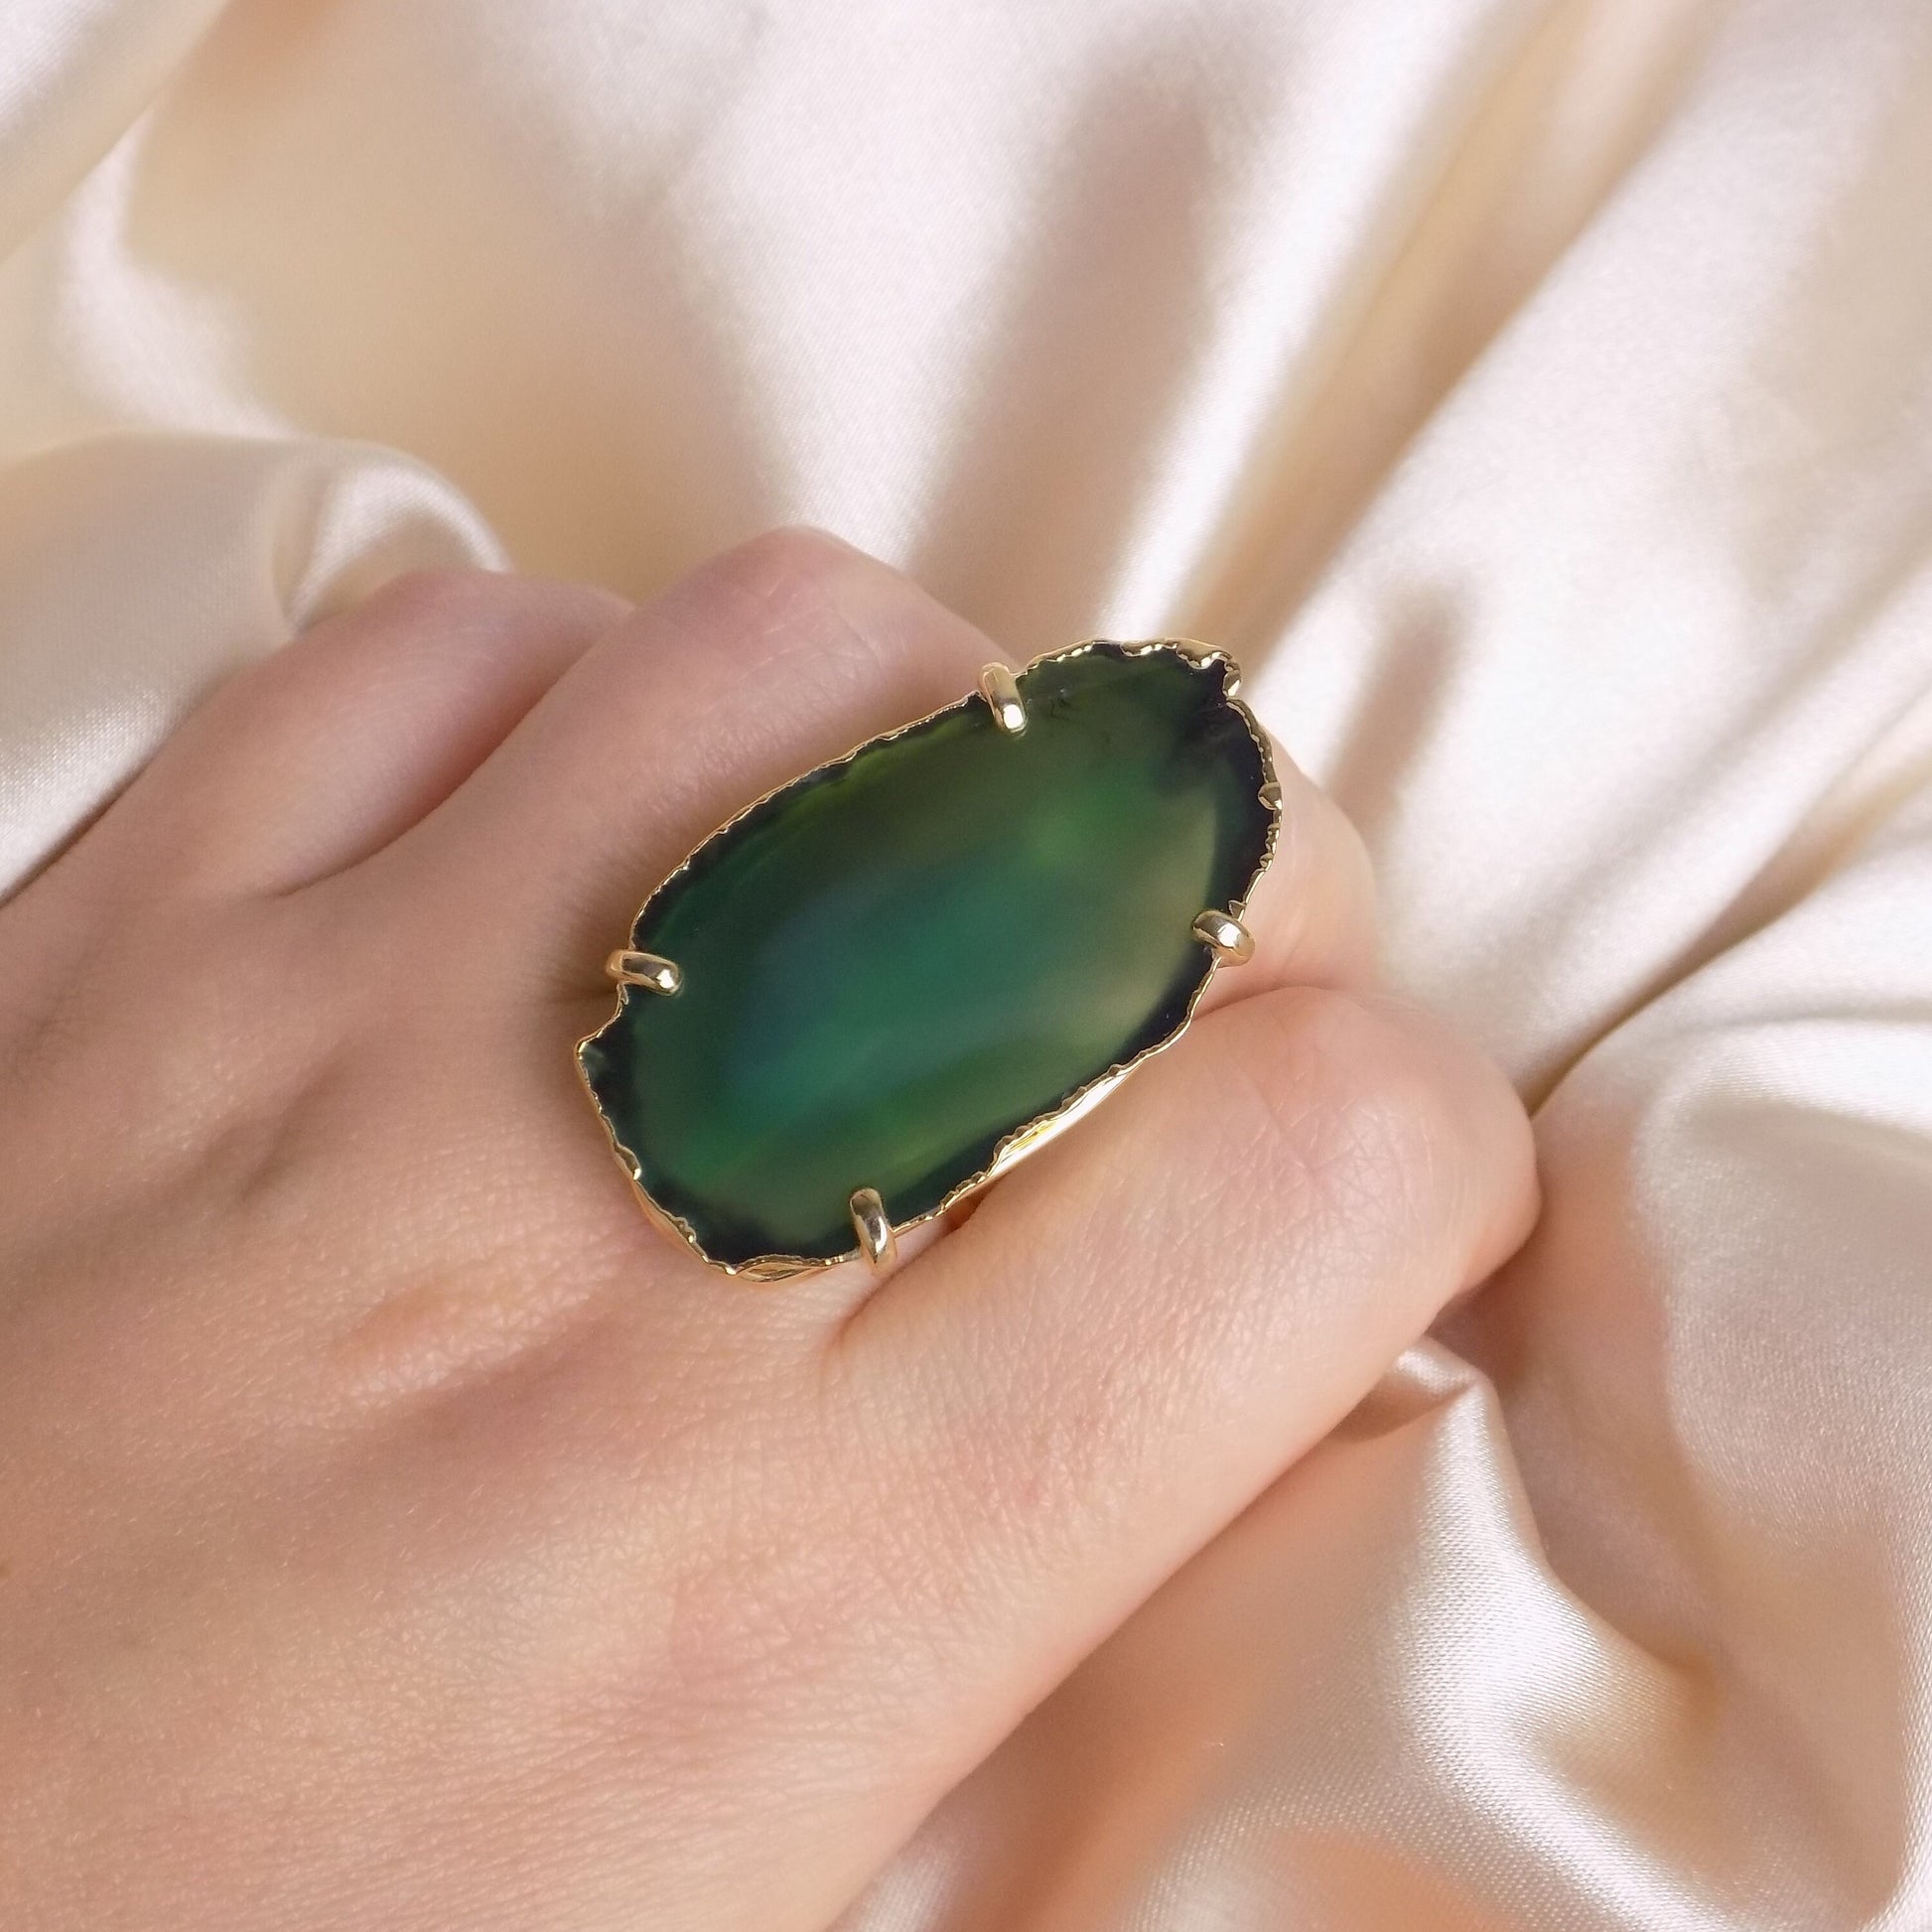 Emerald Green Agate Ring Gold - Statement Geode Ring Adjustable - Boho Large Stone - G15-224